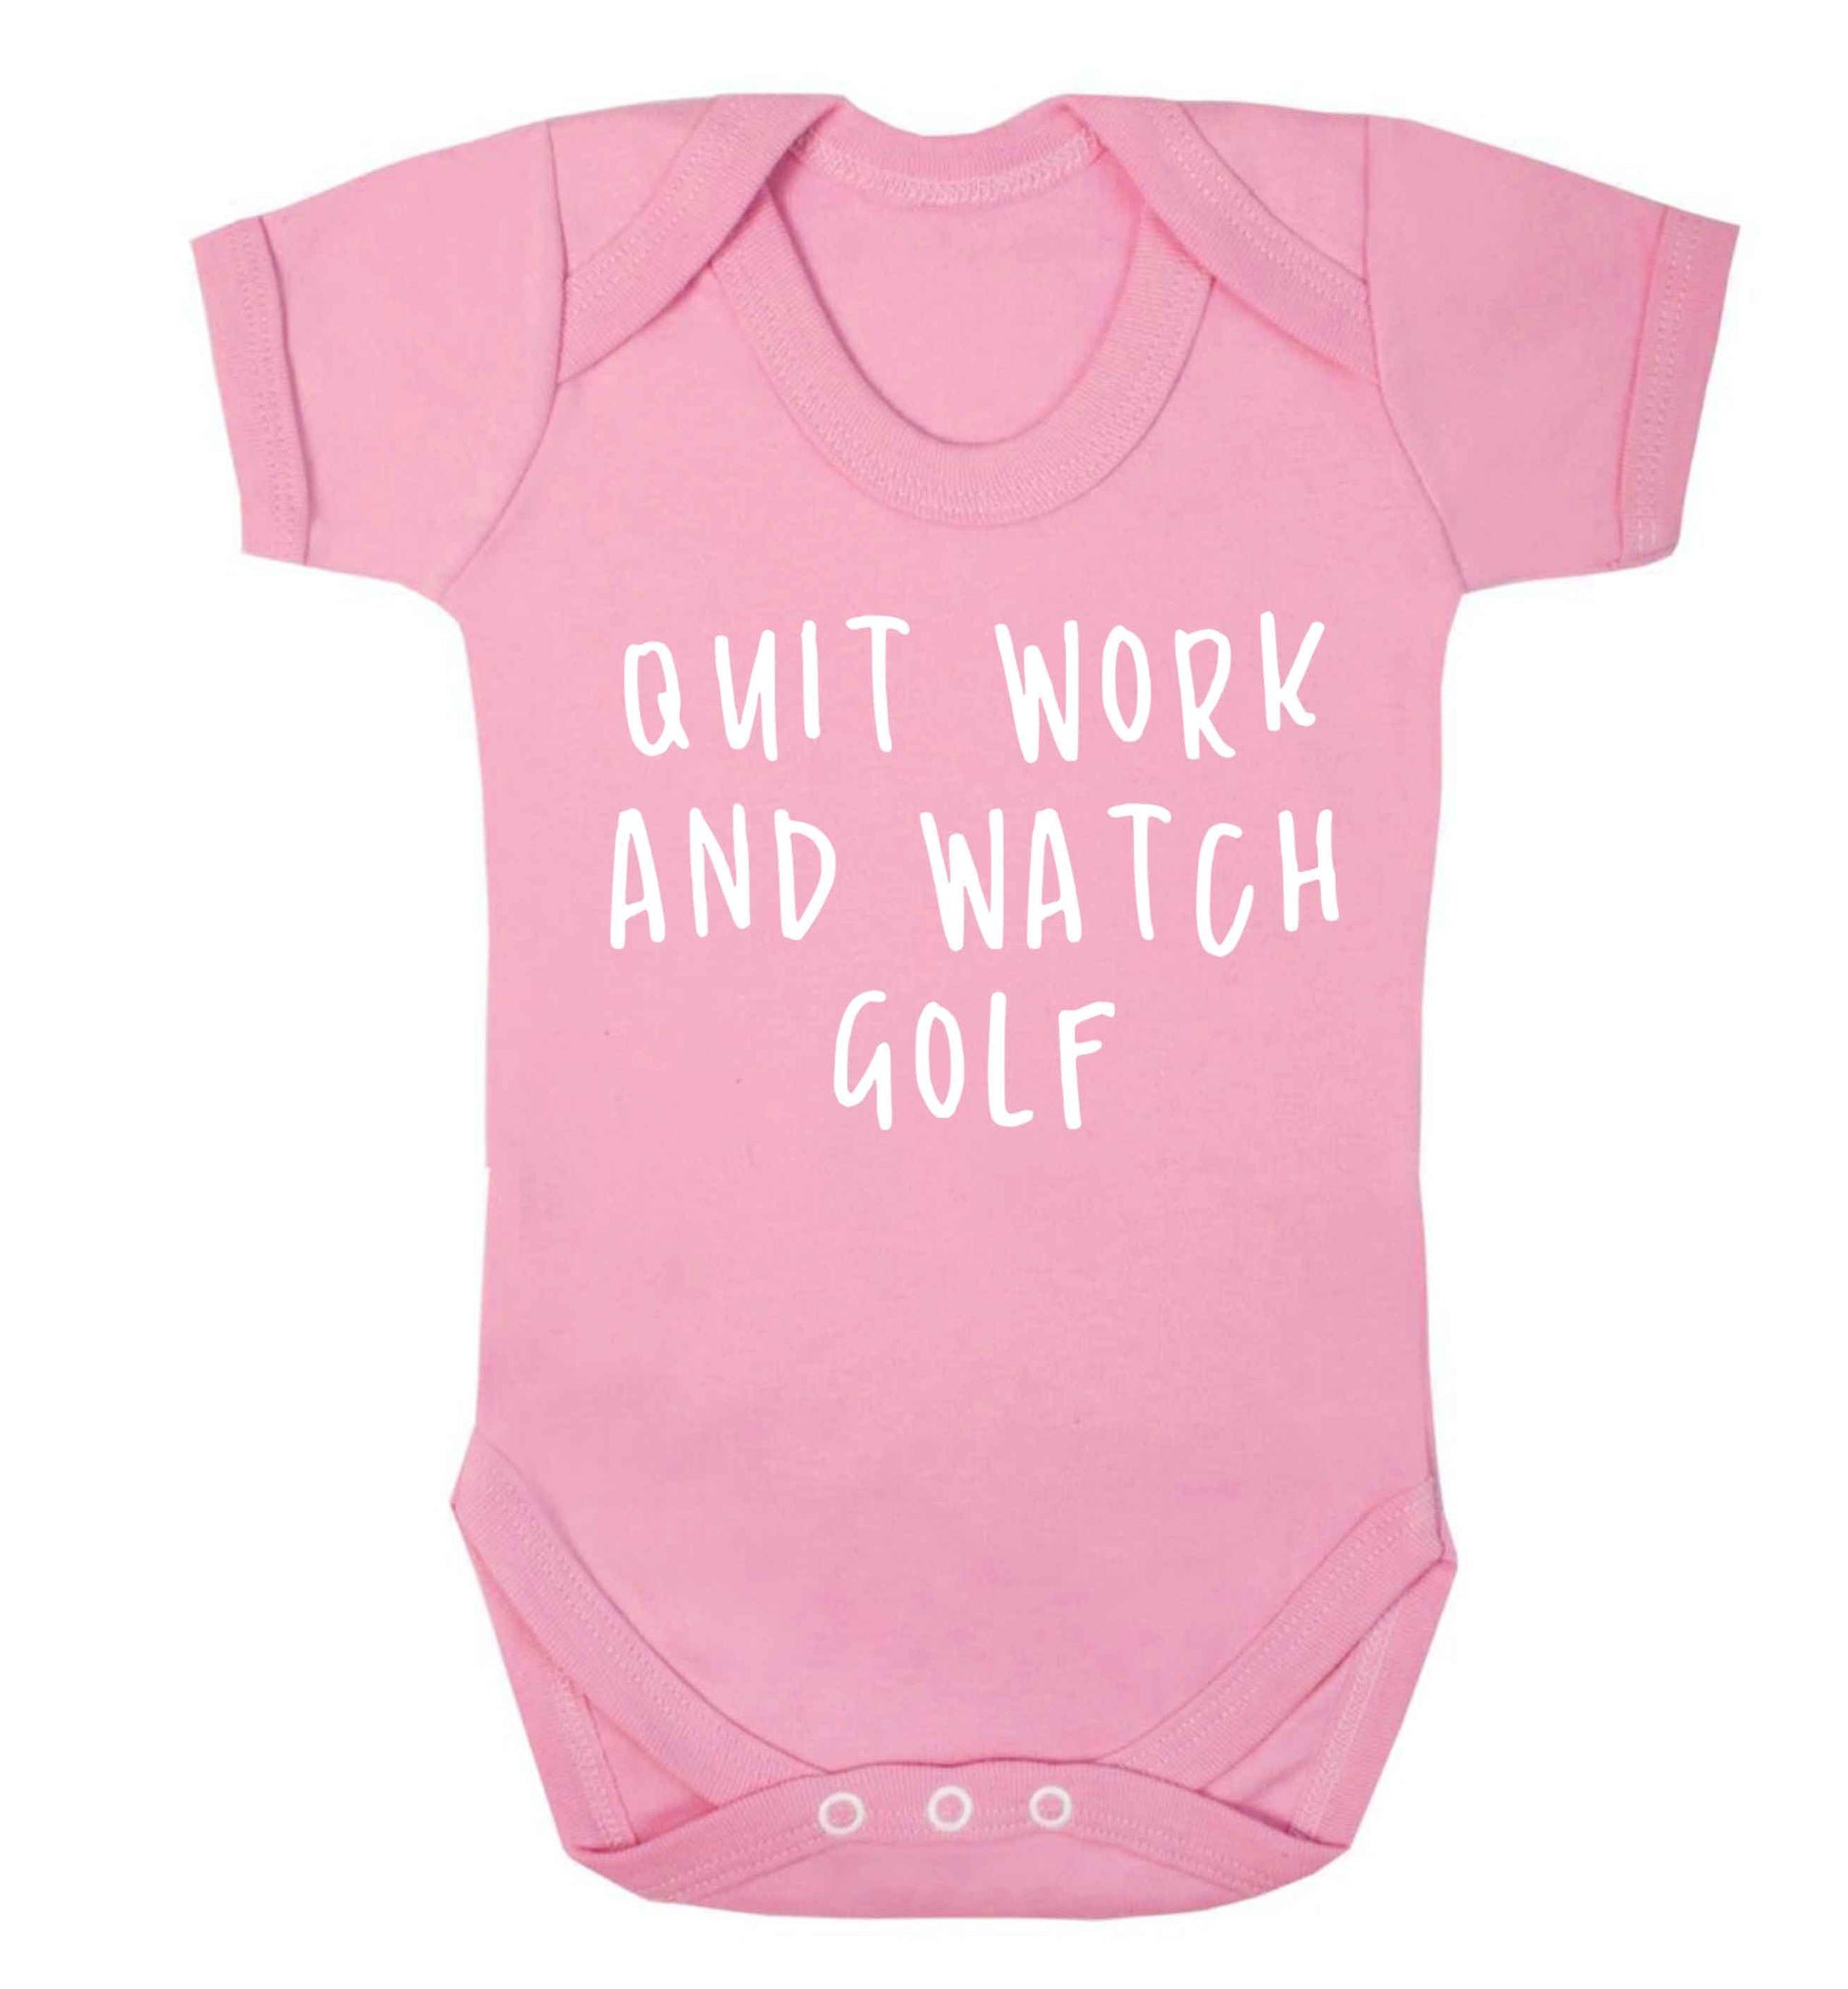 Quit work and watch golf Baby Vest pale pink 18-24 months